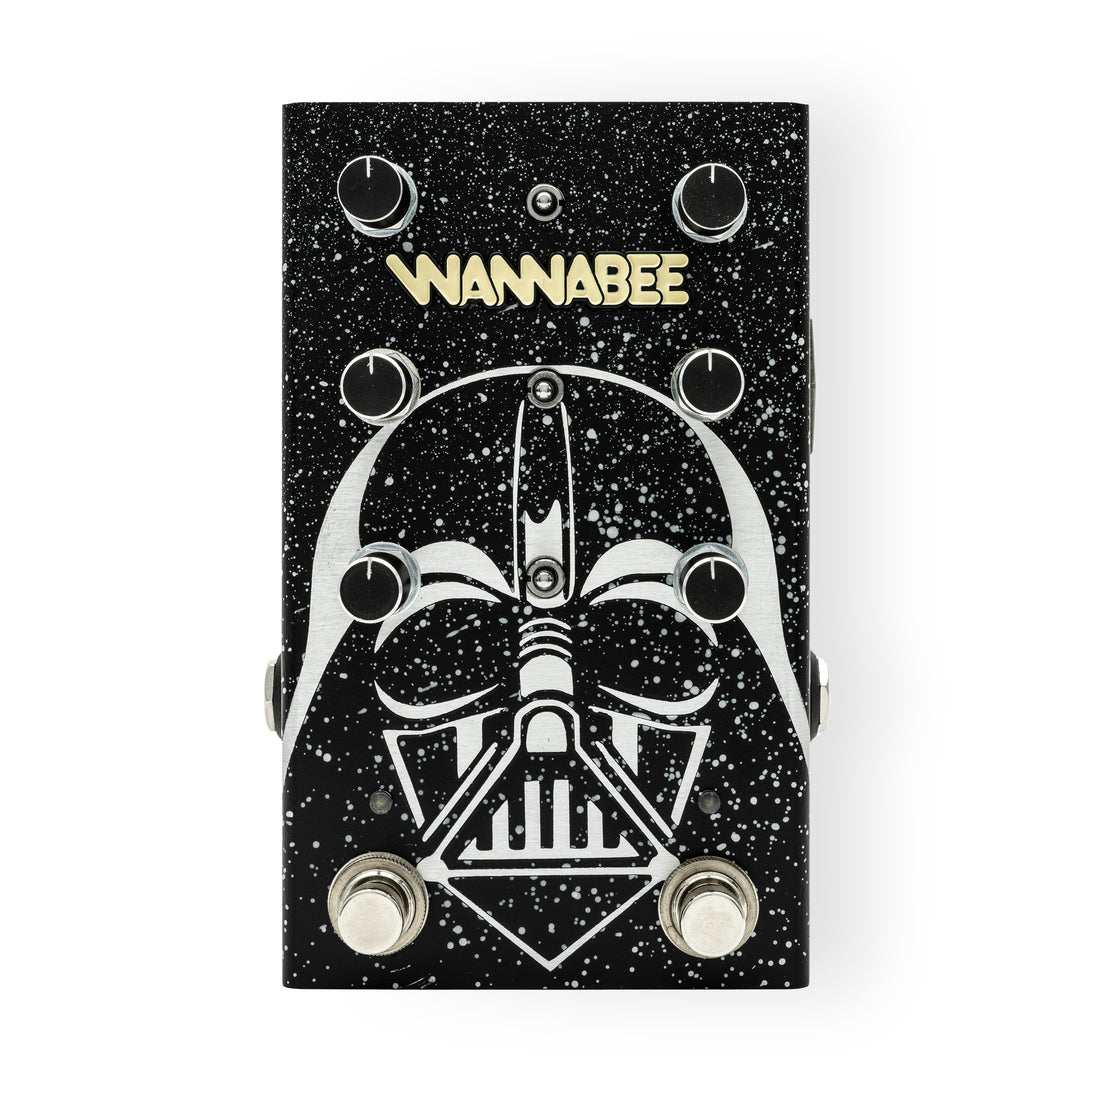 Wannabee Beelateral Buzz • Custom Shop • Revenge of the 5th